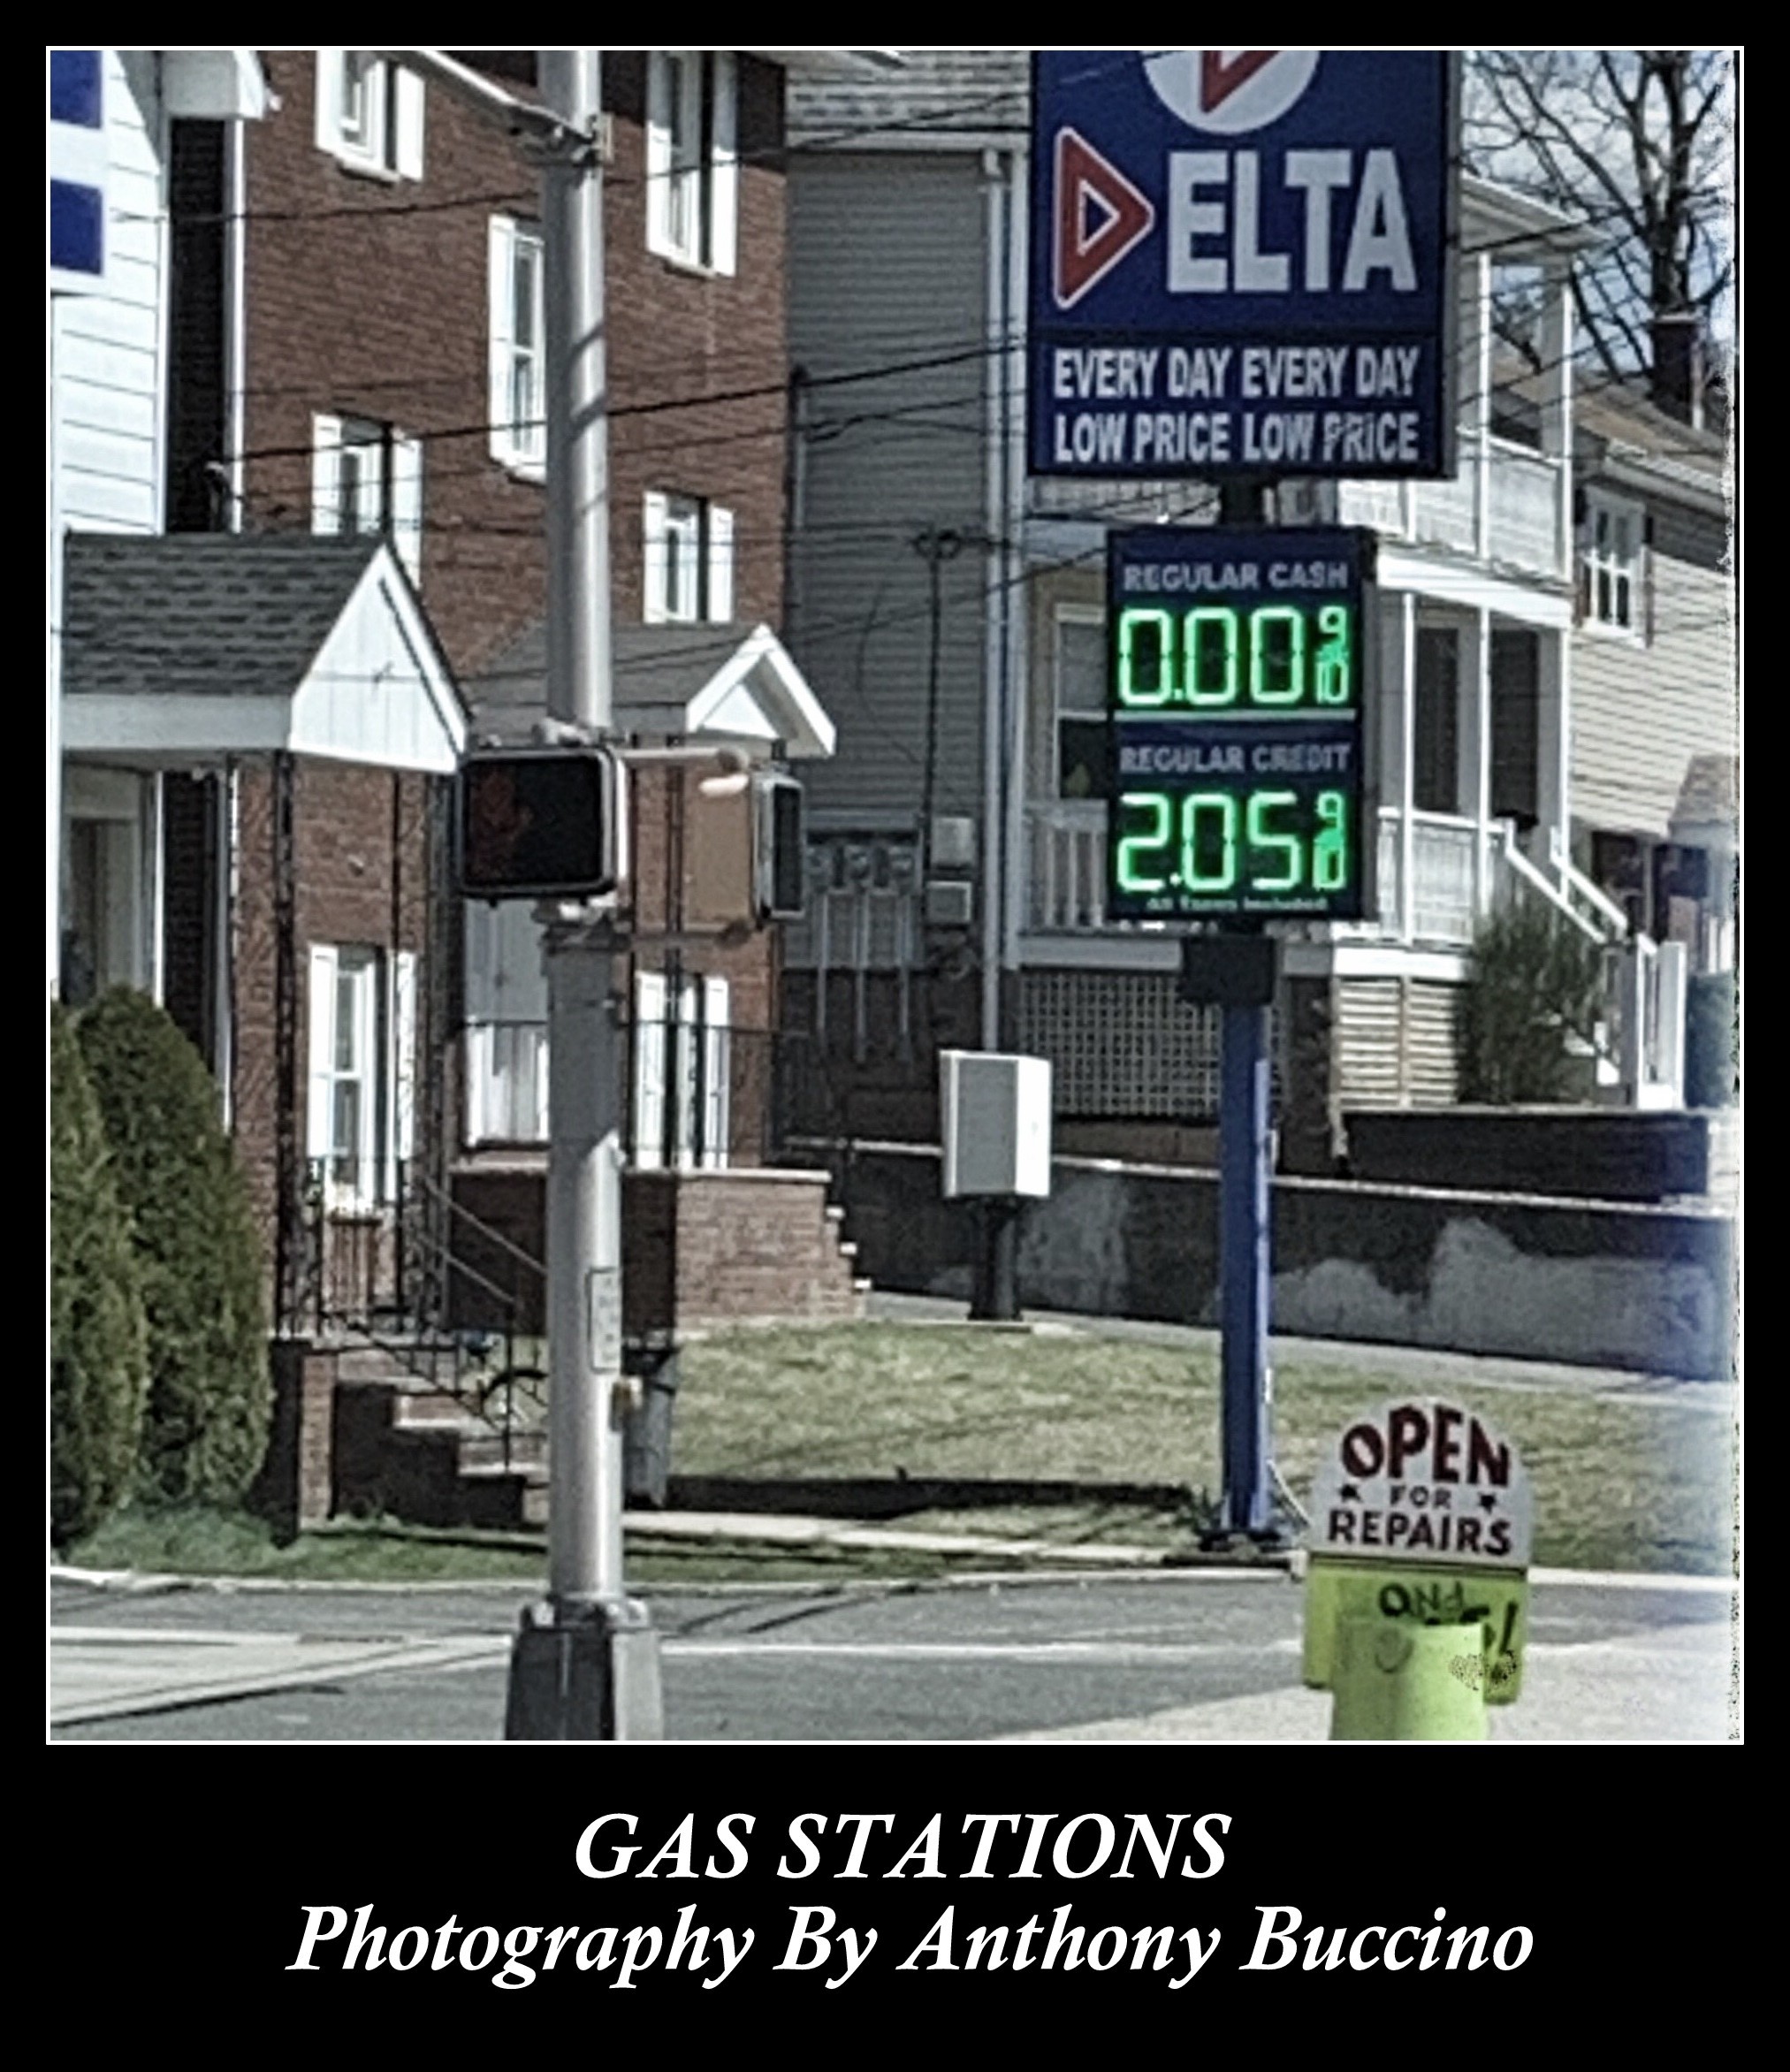 GAS STATIONS Photography By Anthony Buccino, Kindle edition